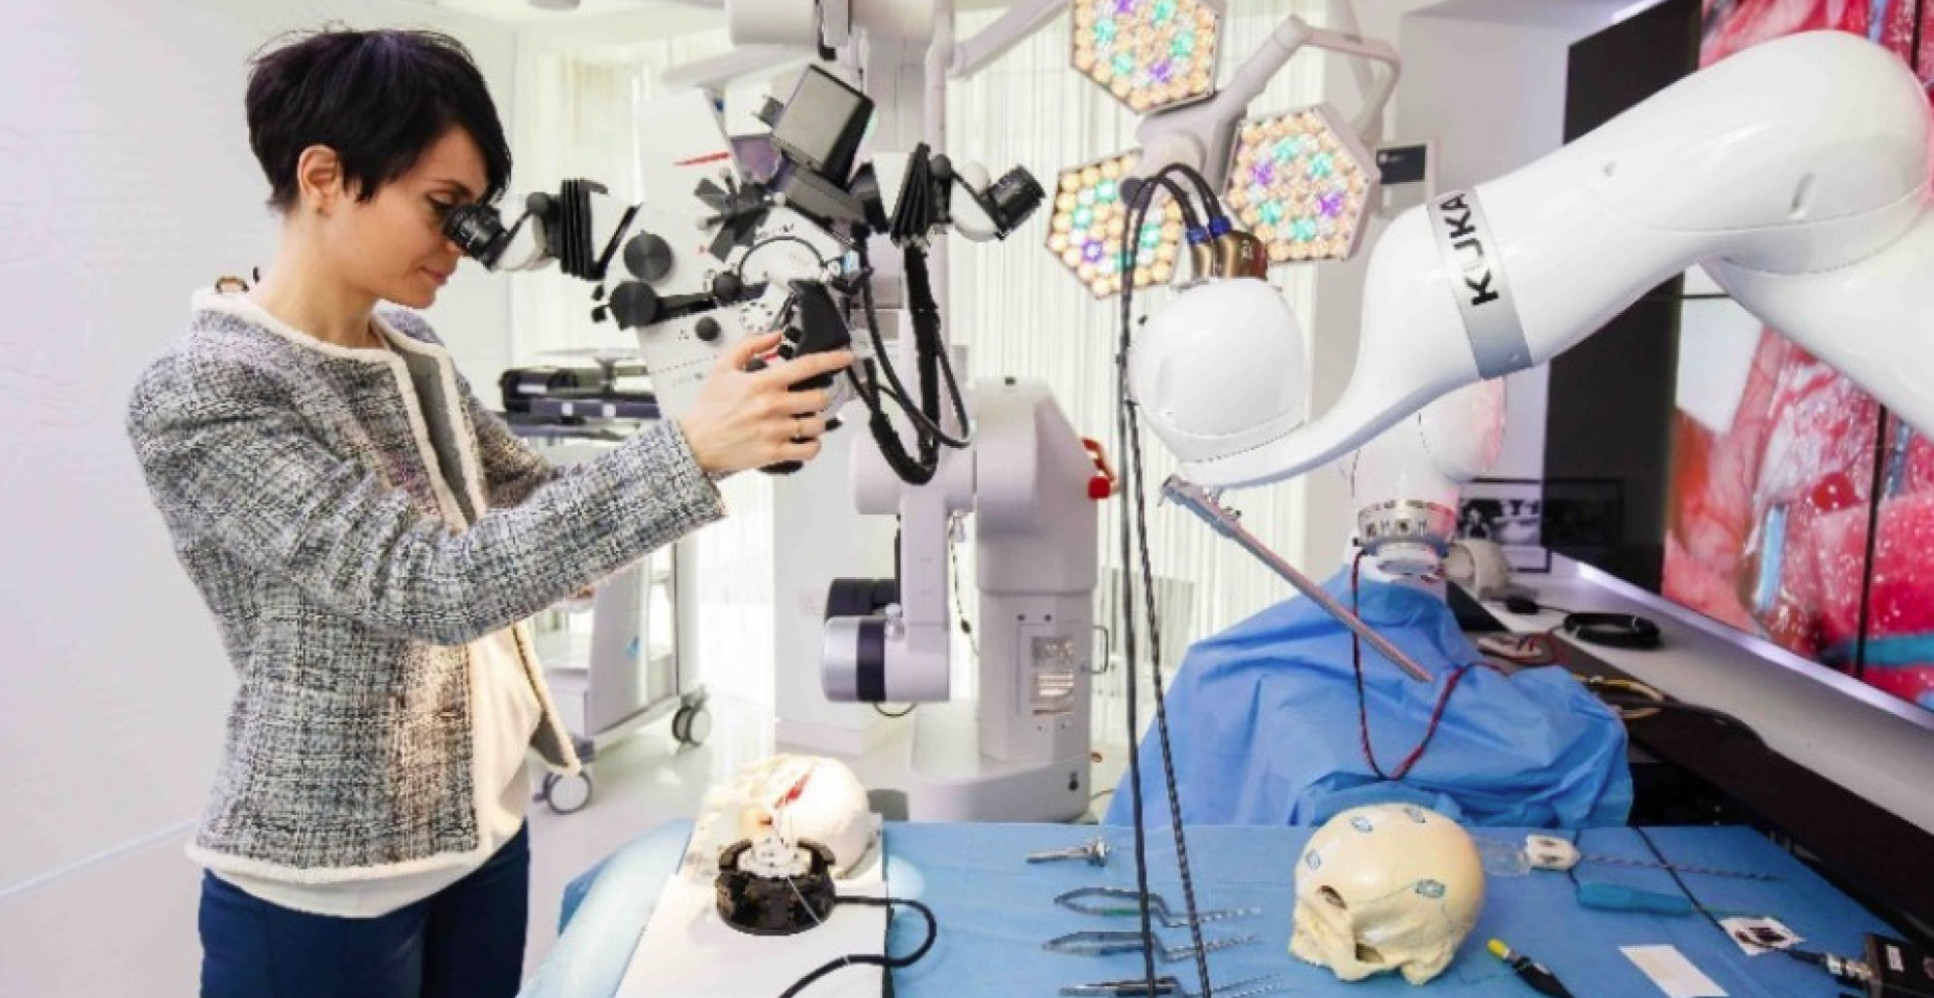 Cognitive Vision in Robotic Surgery